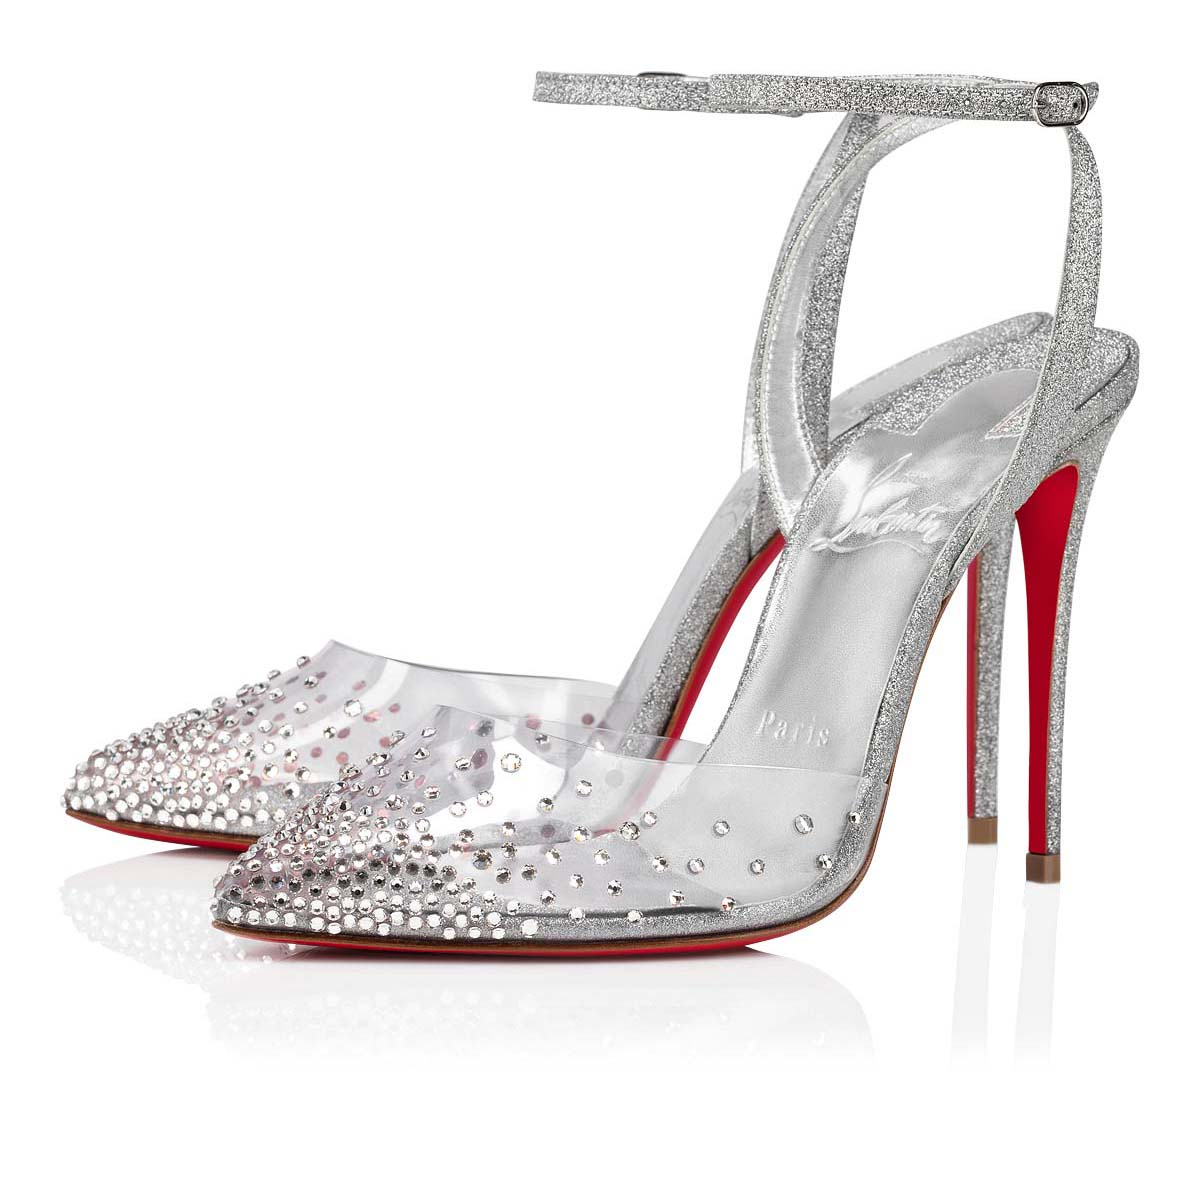 99 mm Pumps - PVC, calf leather and - Silver - Christian Louboutin